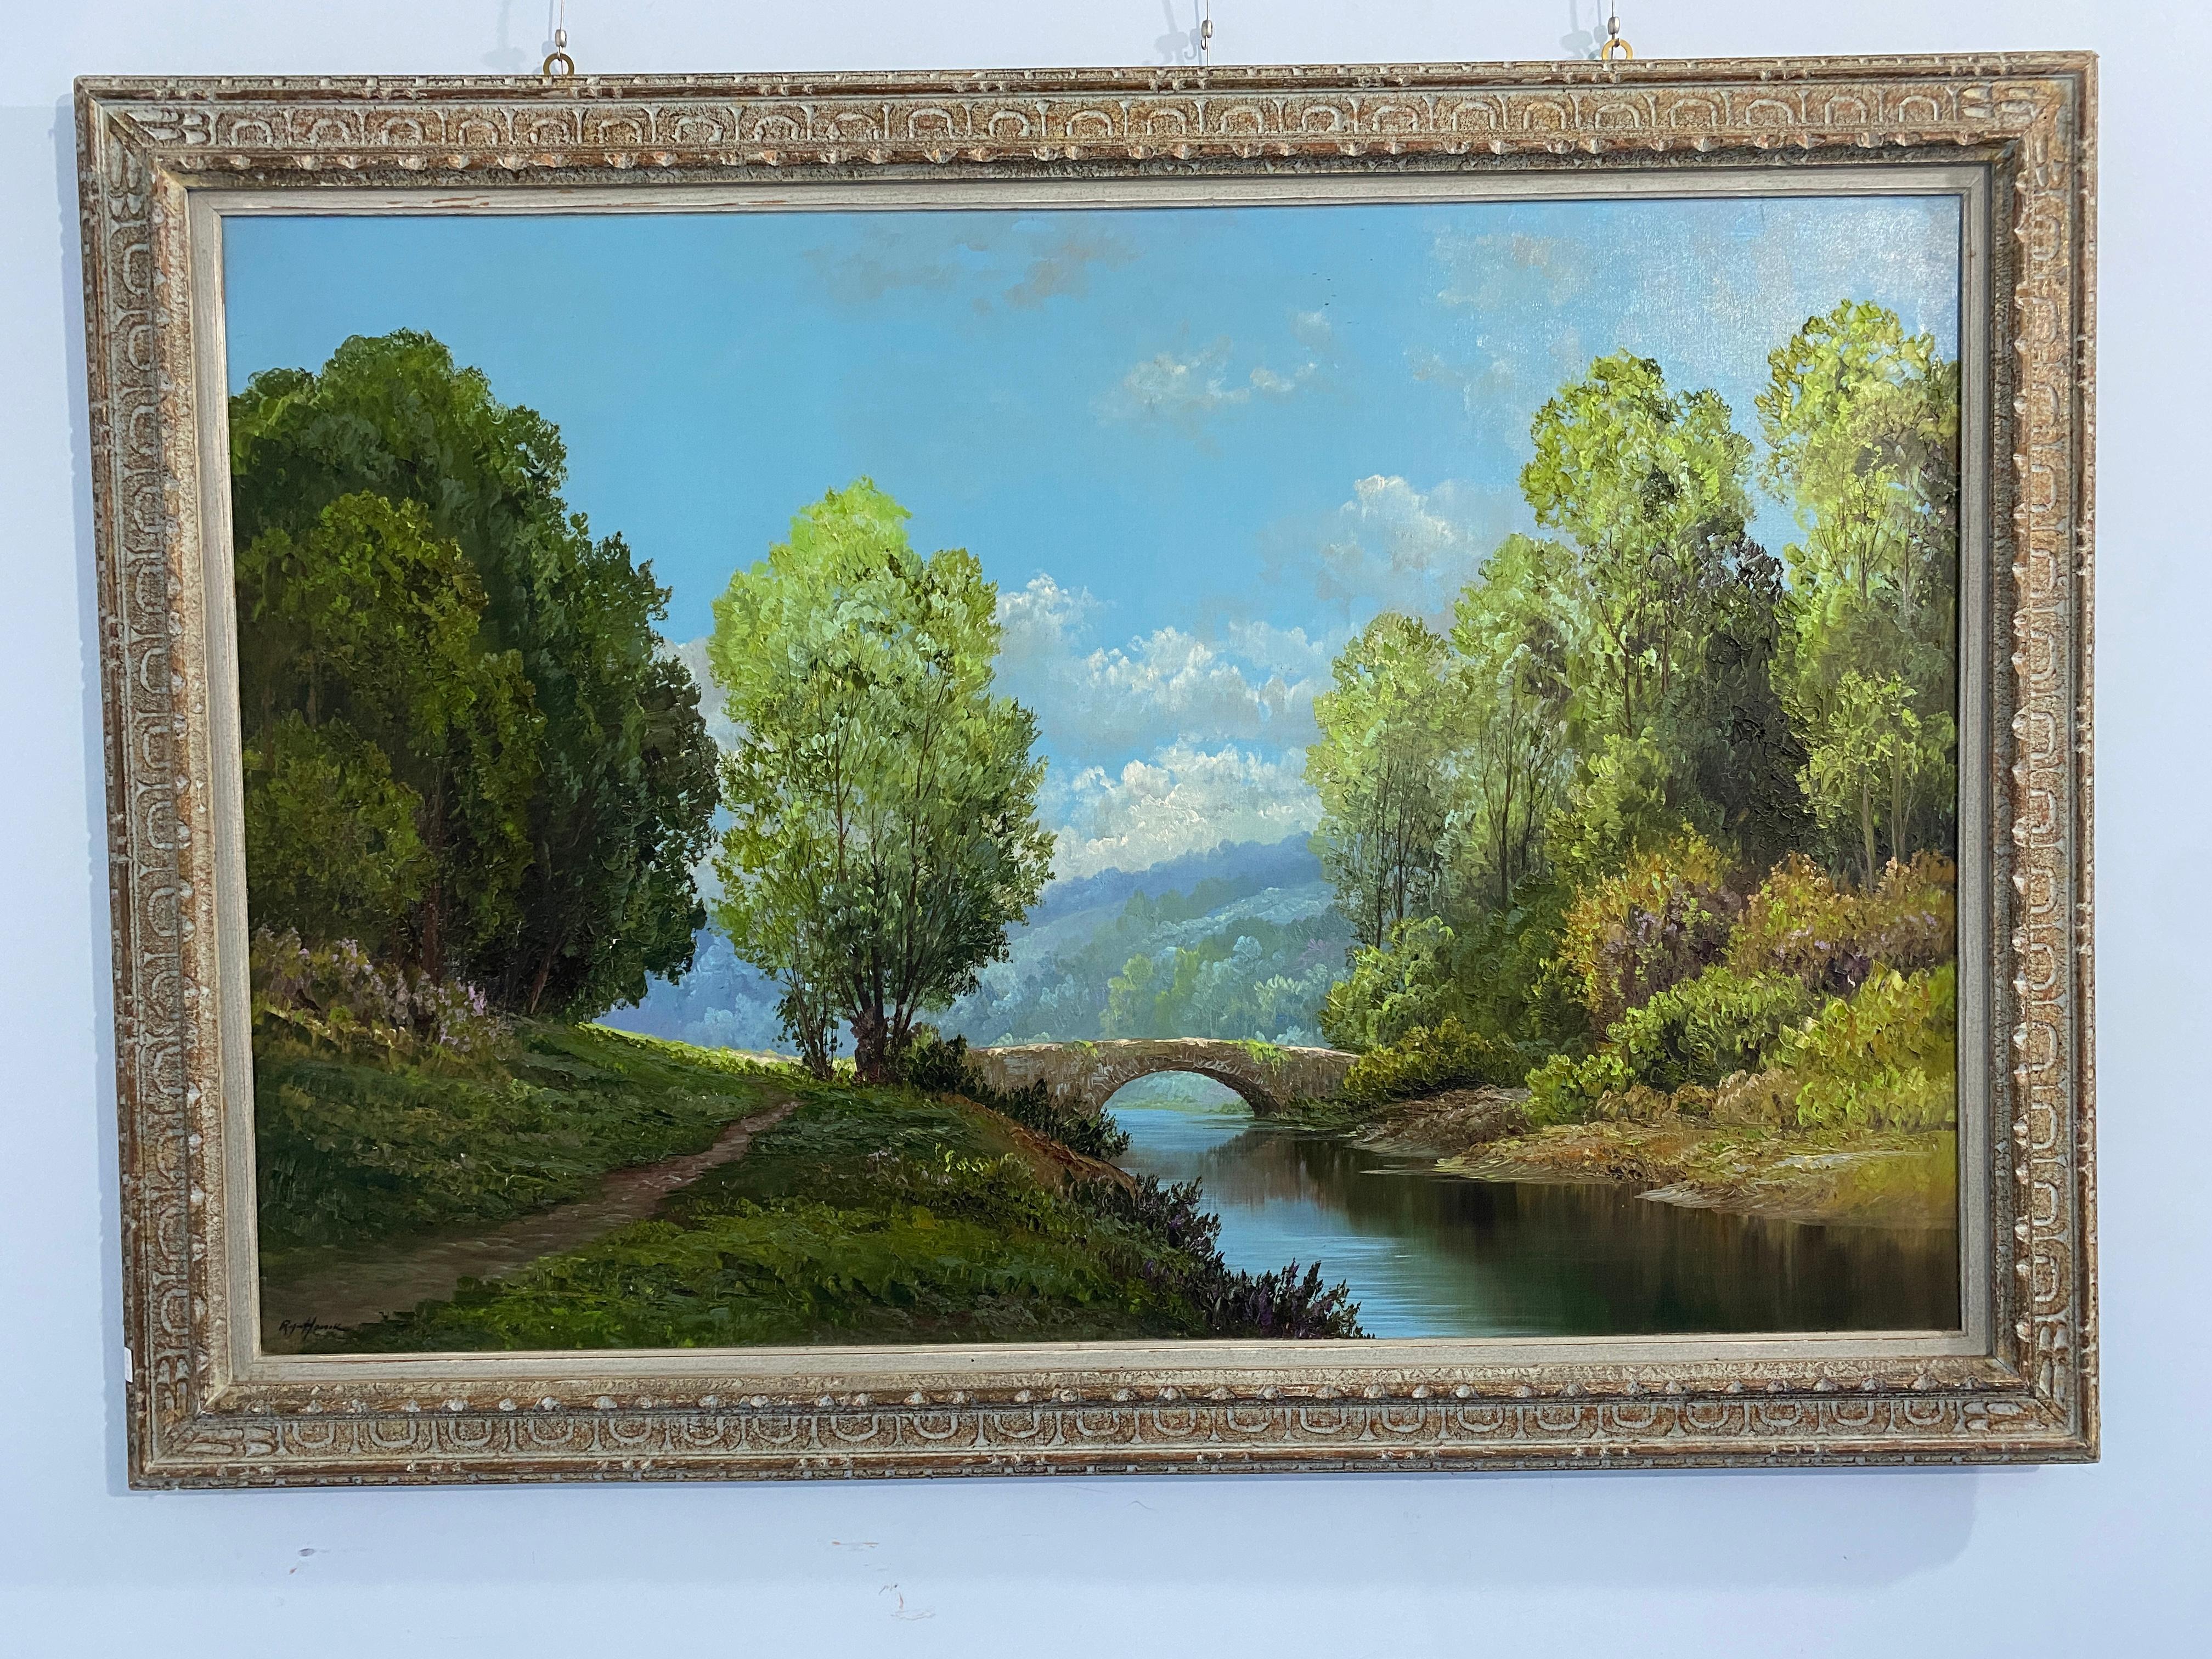 Stunning oil painting of remarkable size and truly decorative,the painting captures the serene atmosphere of an unspoiled countryside.A river gently crosses the landscape ,an ancient stone bridge stretches over the waters,majestic trees and green